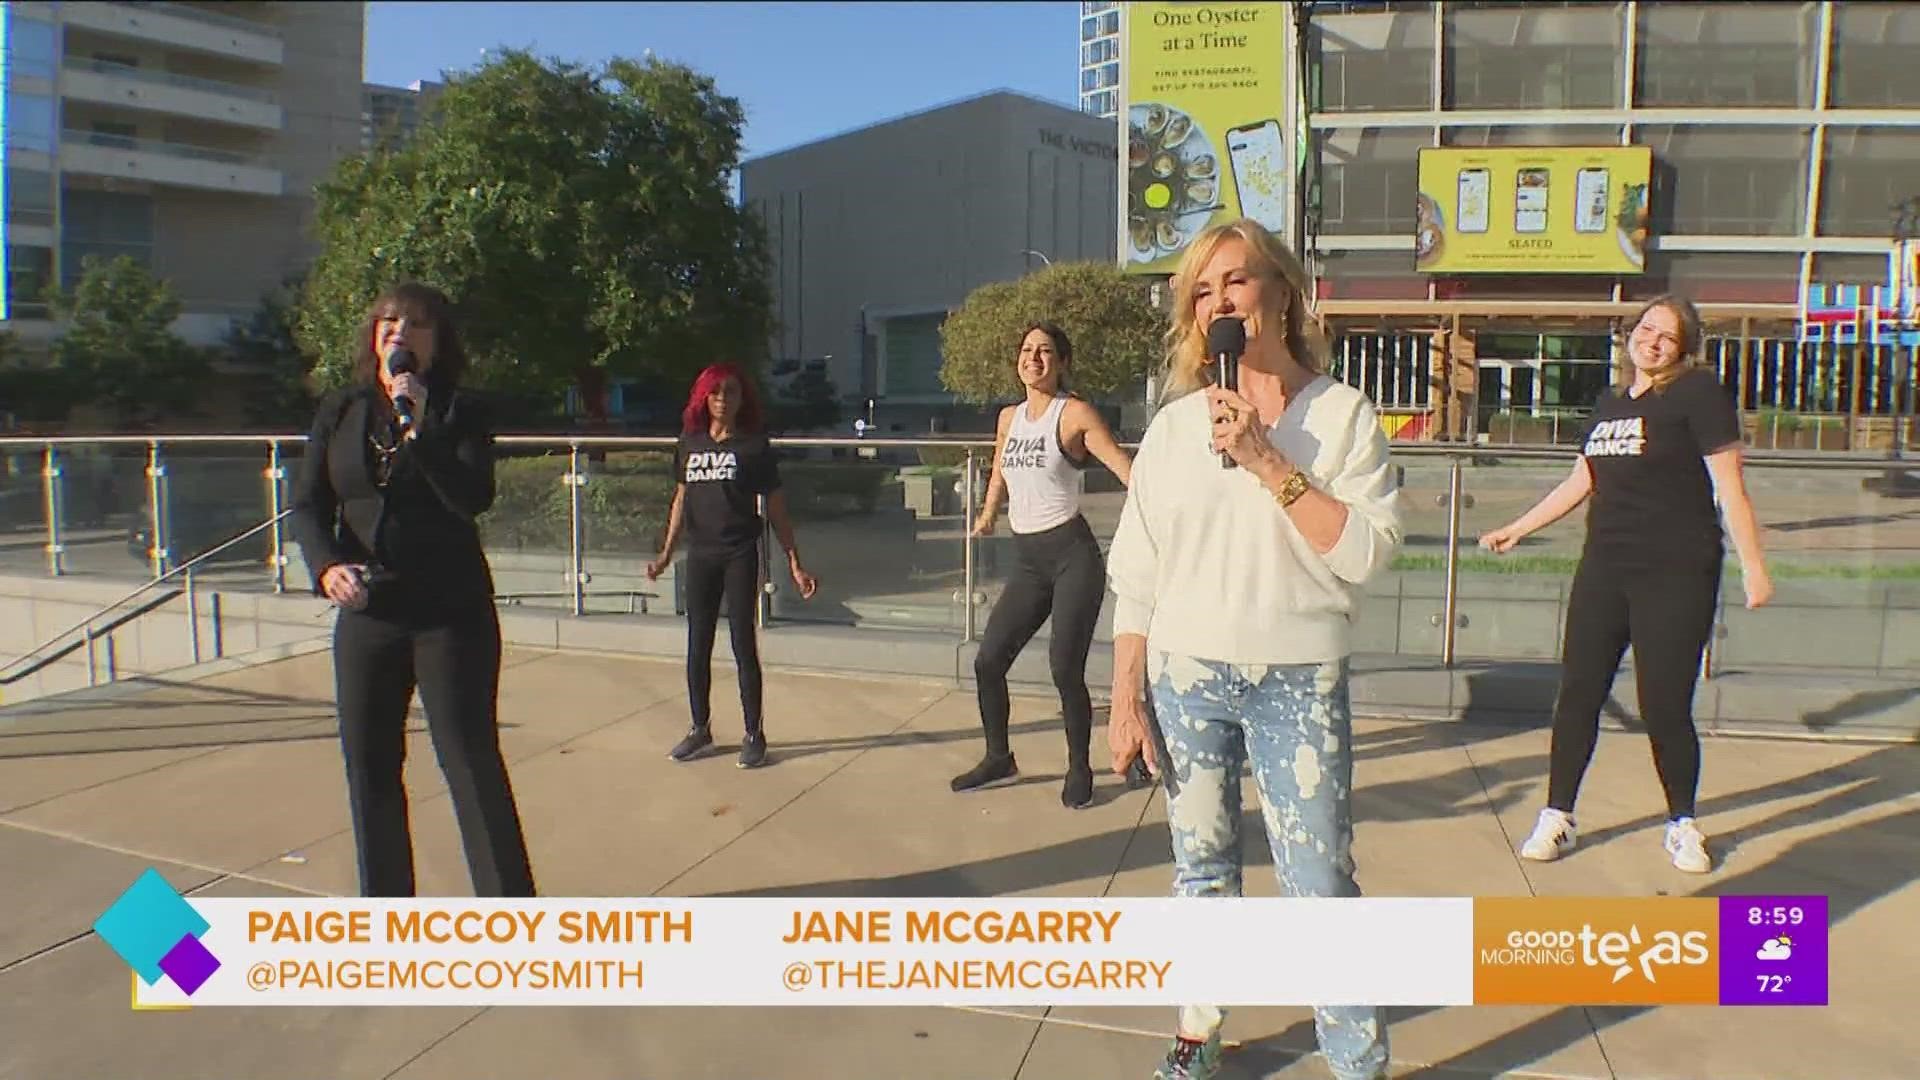 Show us your moves by tagging @WFAAGMT and using #GMTDANCE